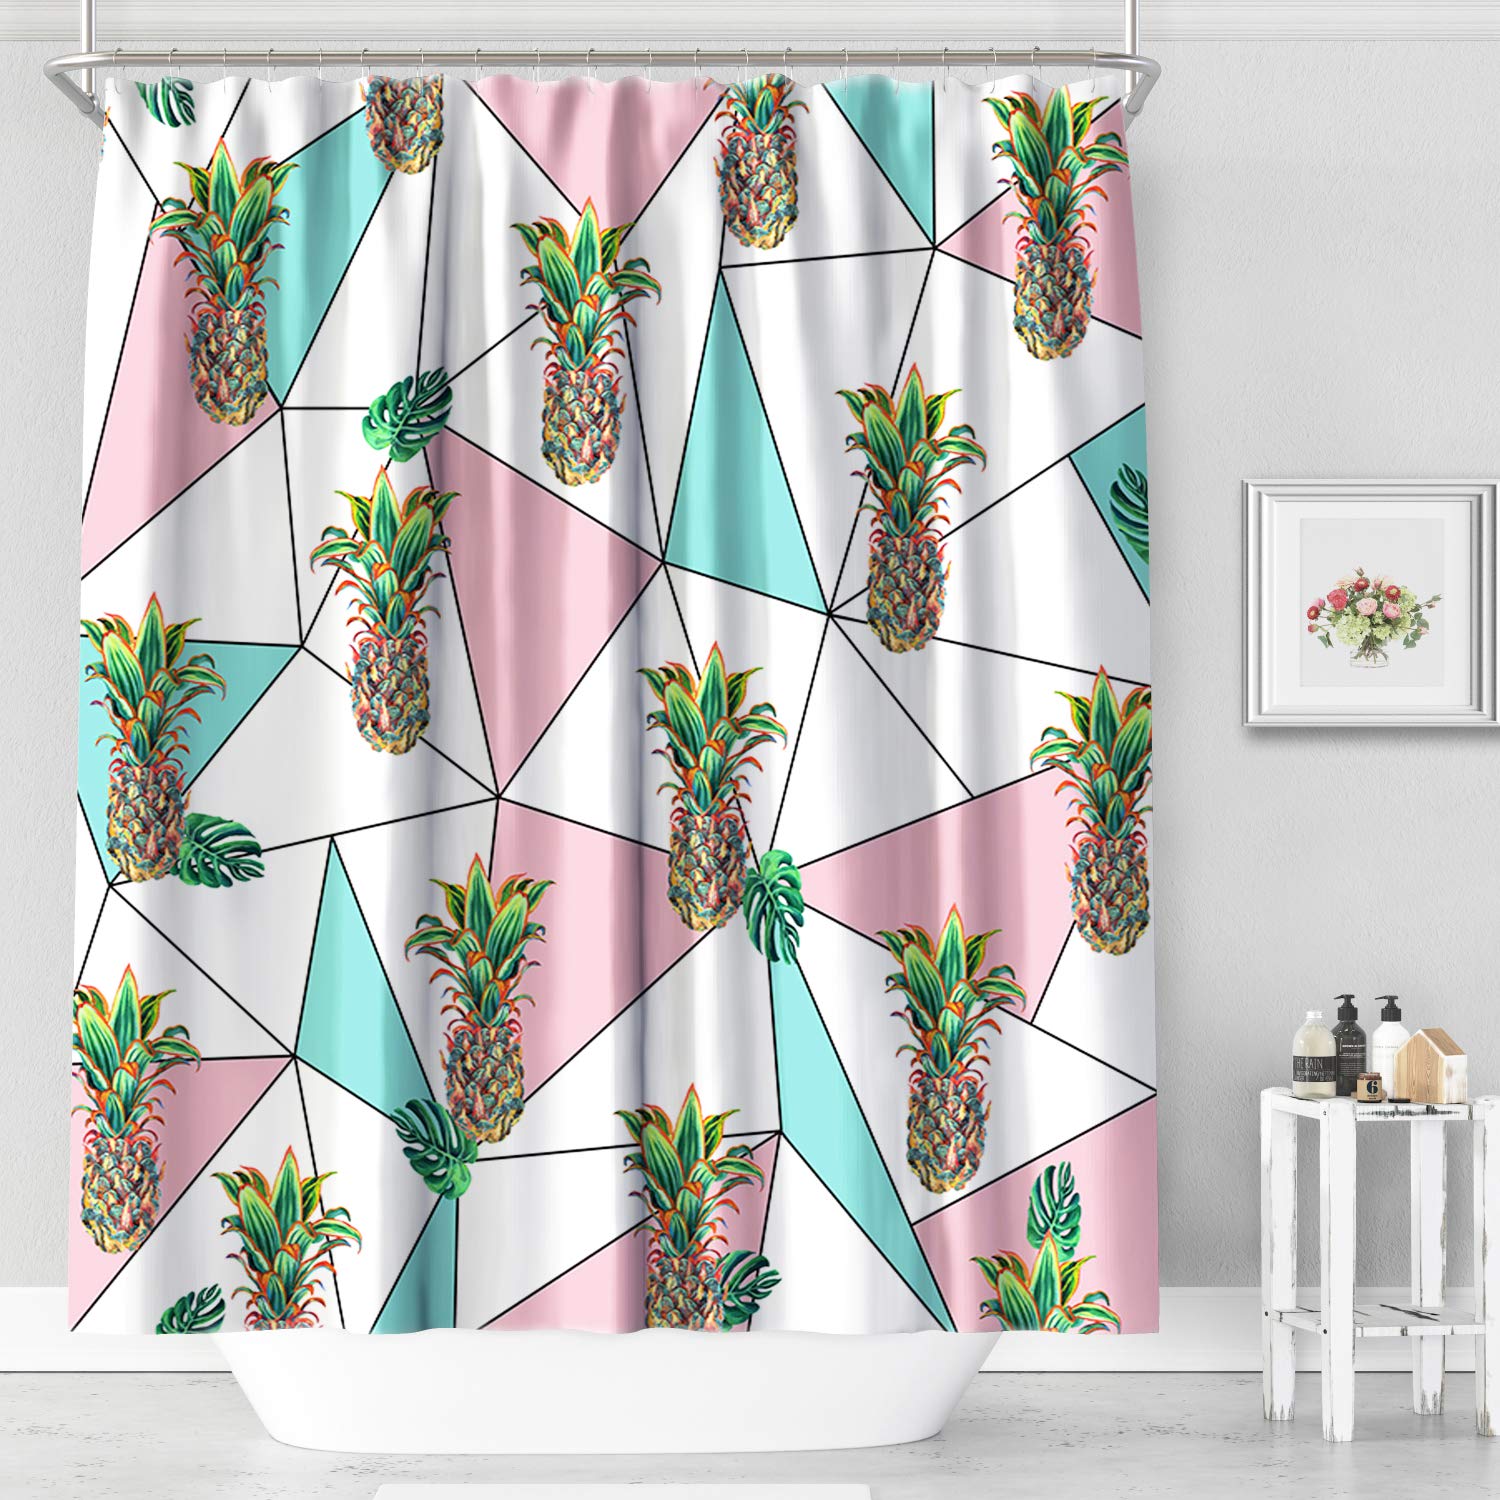 MACOFE Shower Curtain Fabric Shower Curtain Pineapple Shower Curtain Polyester Fabric, Waterproof, Machine Washable,Hooks Included,Bathroom Decor Original Design Hand Drawing,71x71in